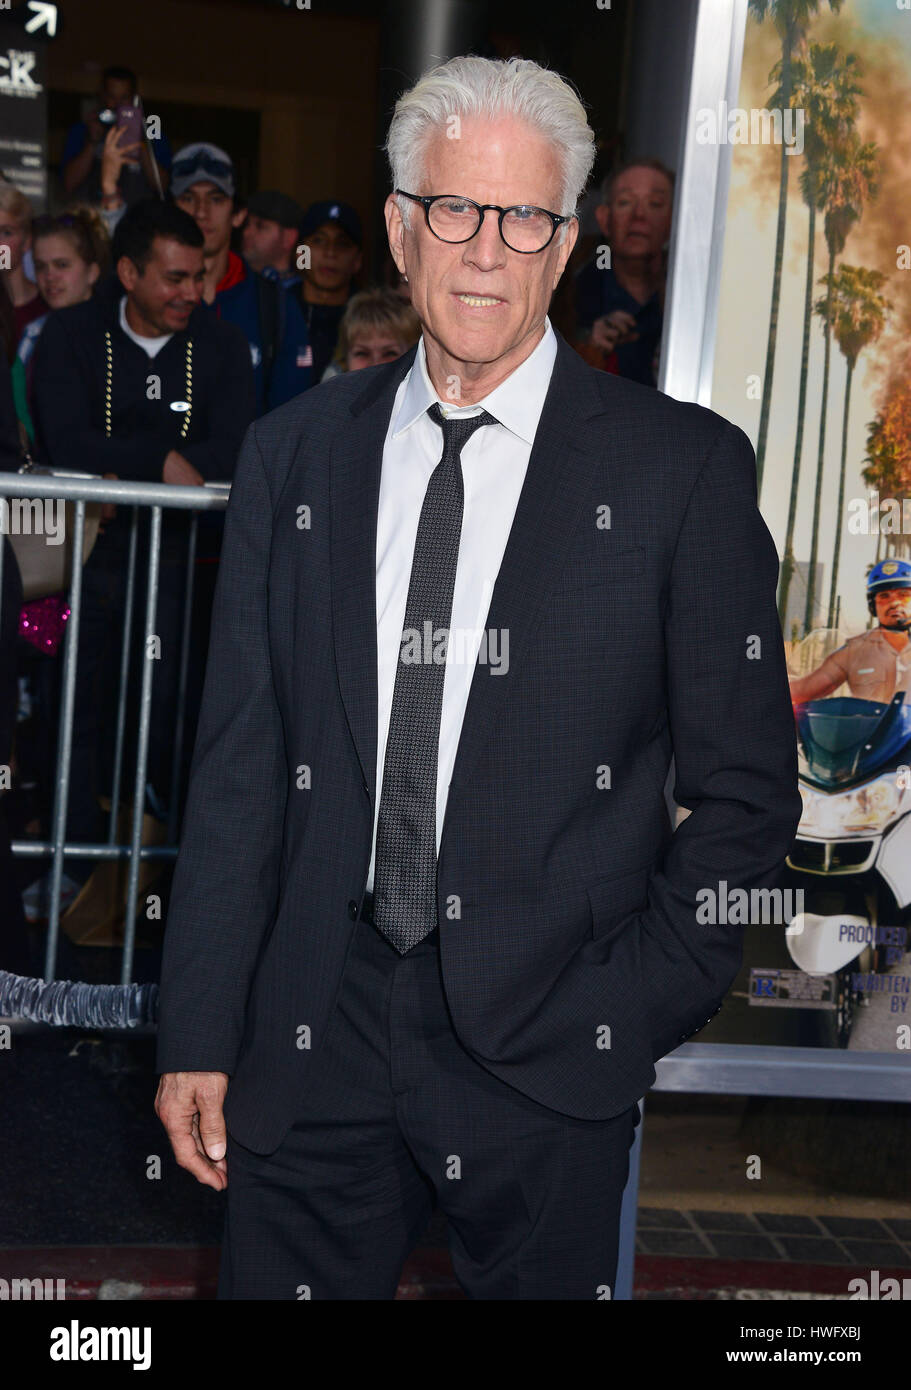 Los Angeles, USA. 20th Mar, 2017. Ted Danson 059 arriving at the CHIPS Premiere at the TCL Chinese Theatre in Los Angeles. March 20, 2017. Credit: Tsuni/USA/Alamy Live News Stock Photo